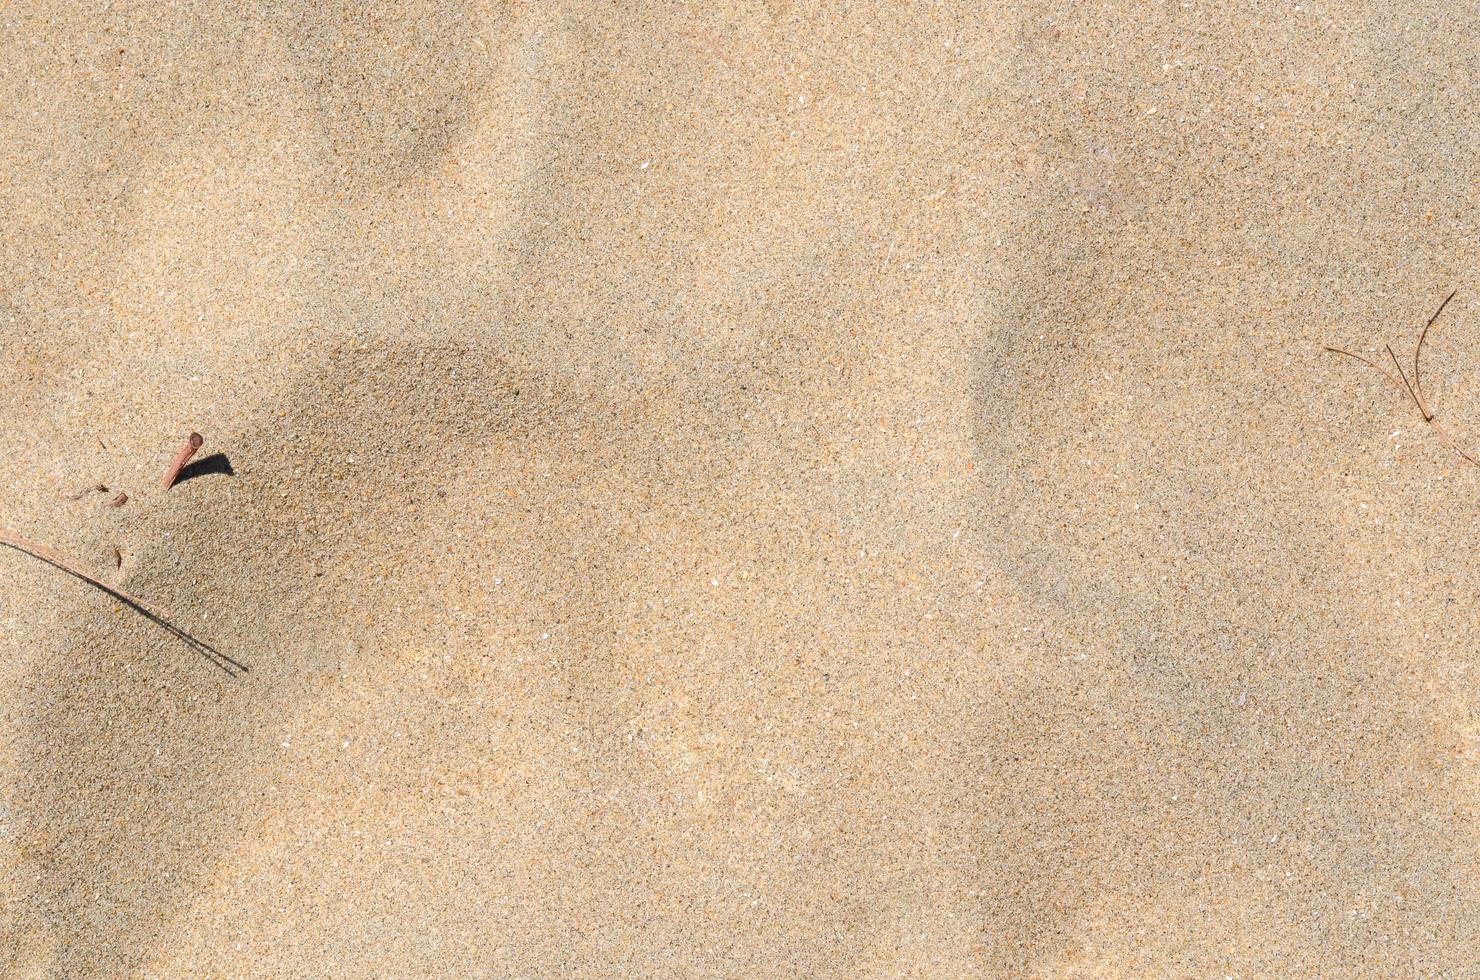 Background and texture photo of sand on the beach.